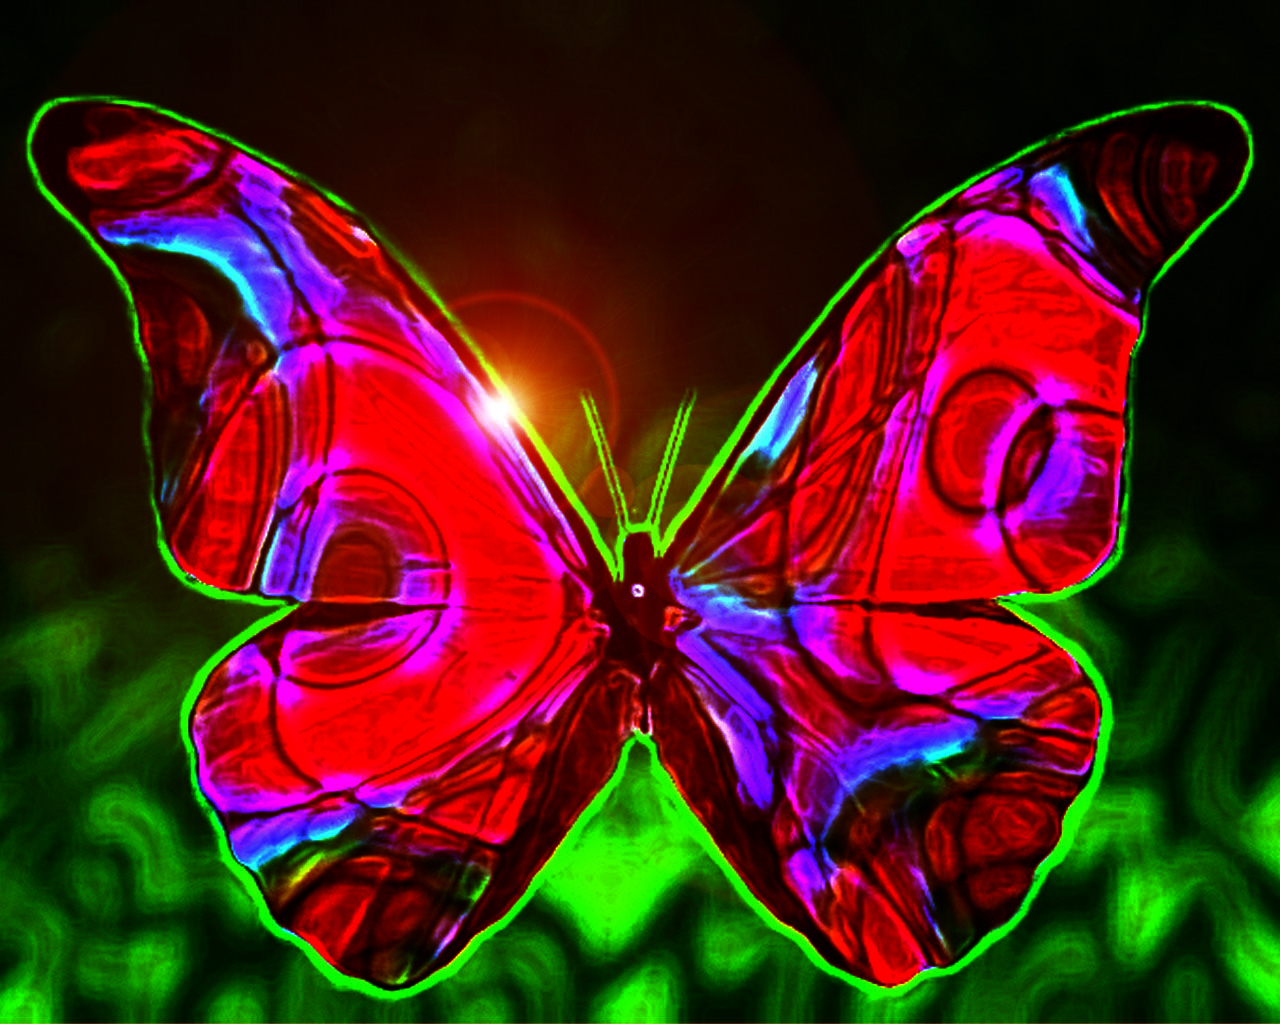  Butterfly Background Wallpapers on this Butterfly Background